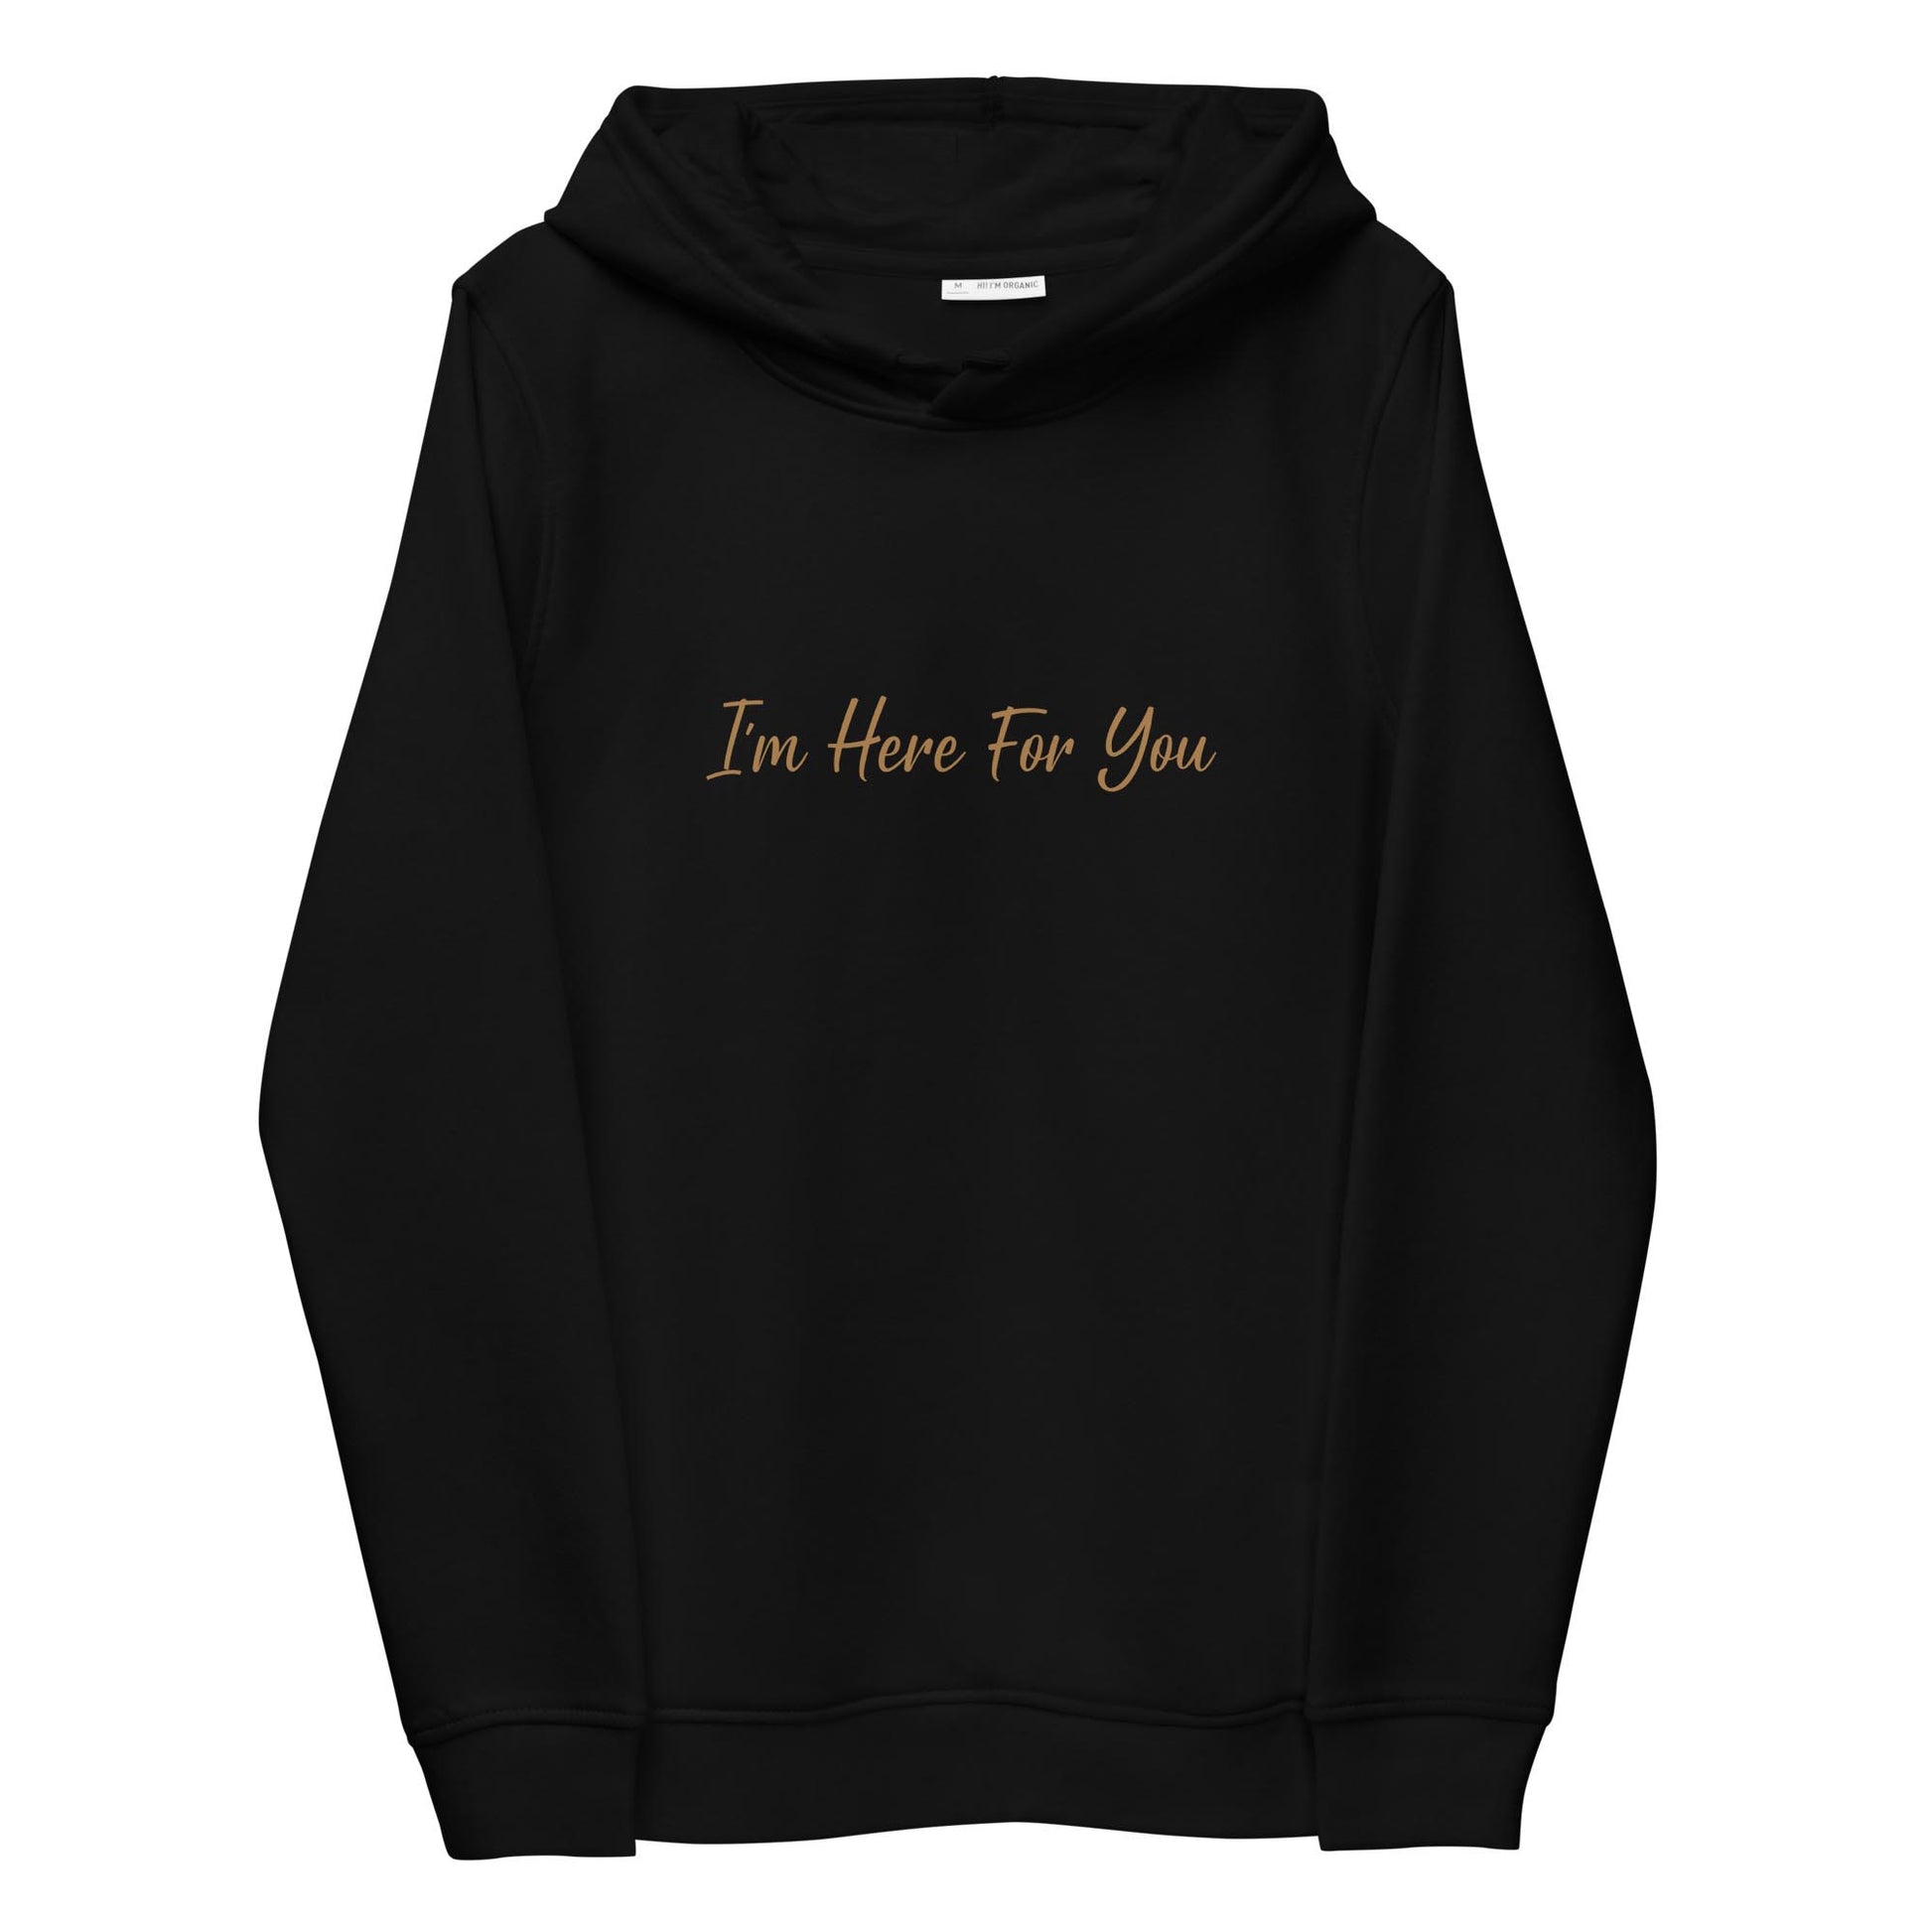 Women black sustainable hoodie with inspirational quote, "I'm Here For You."